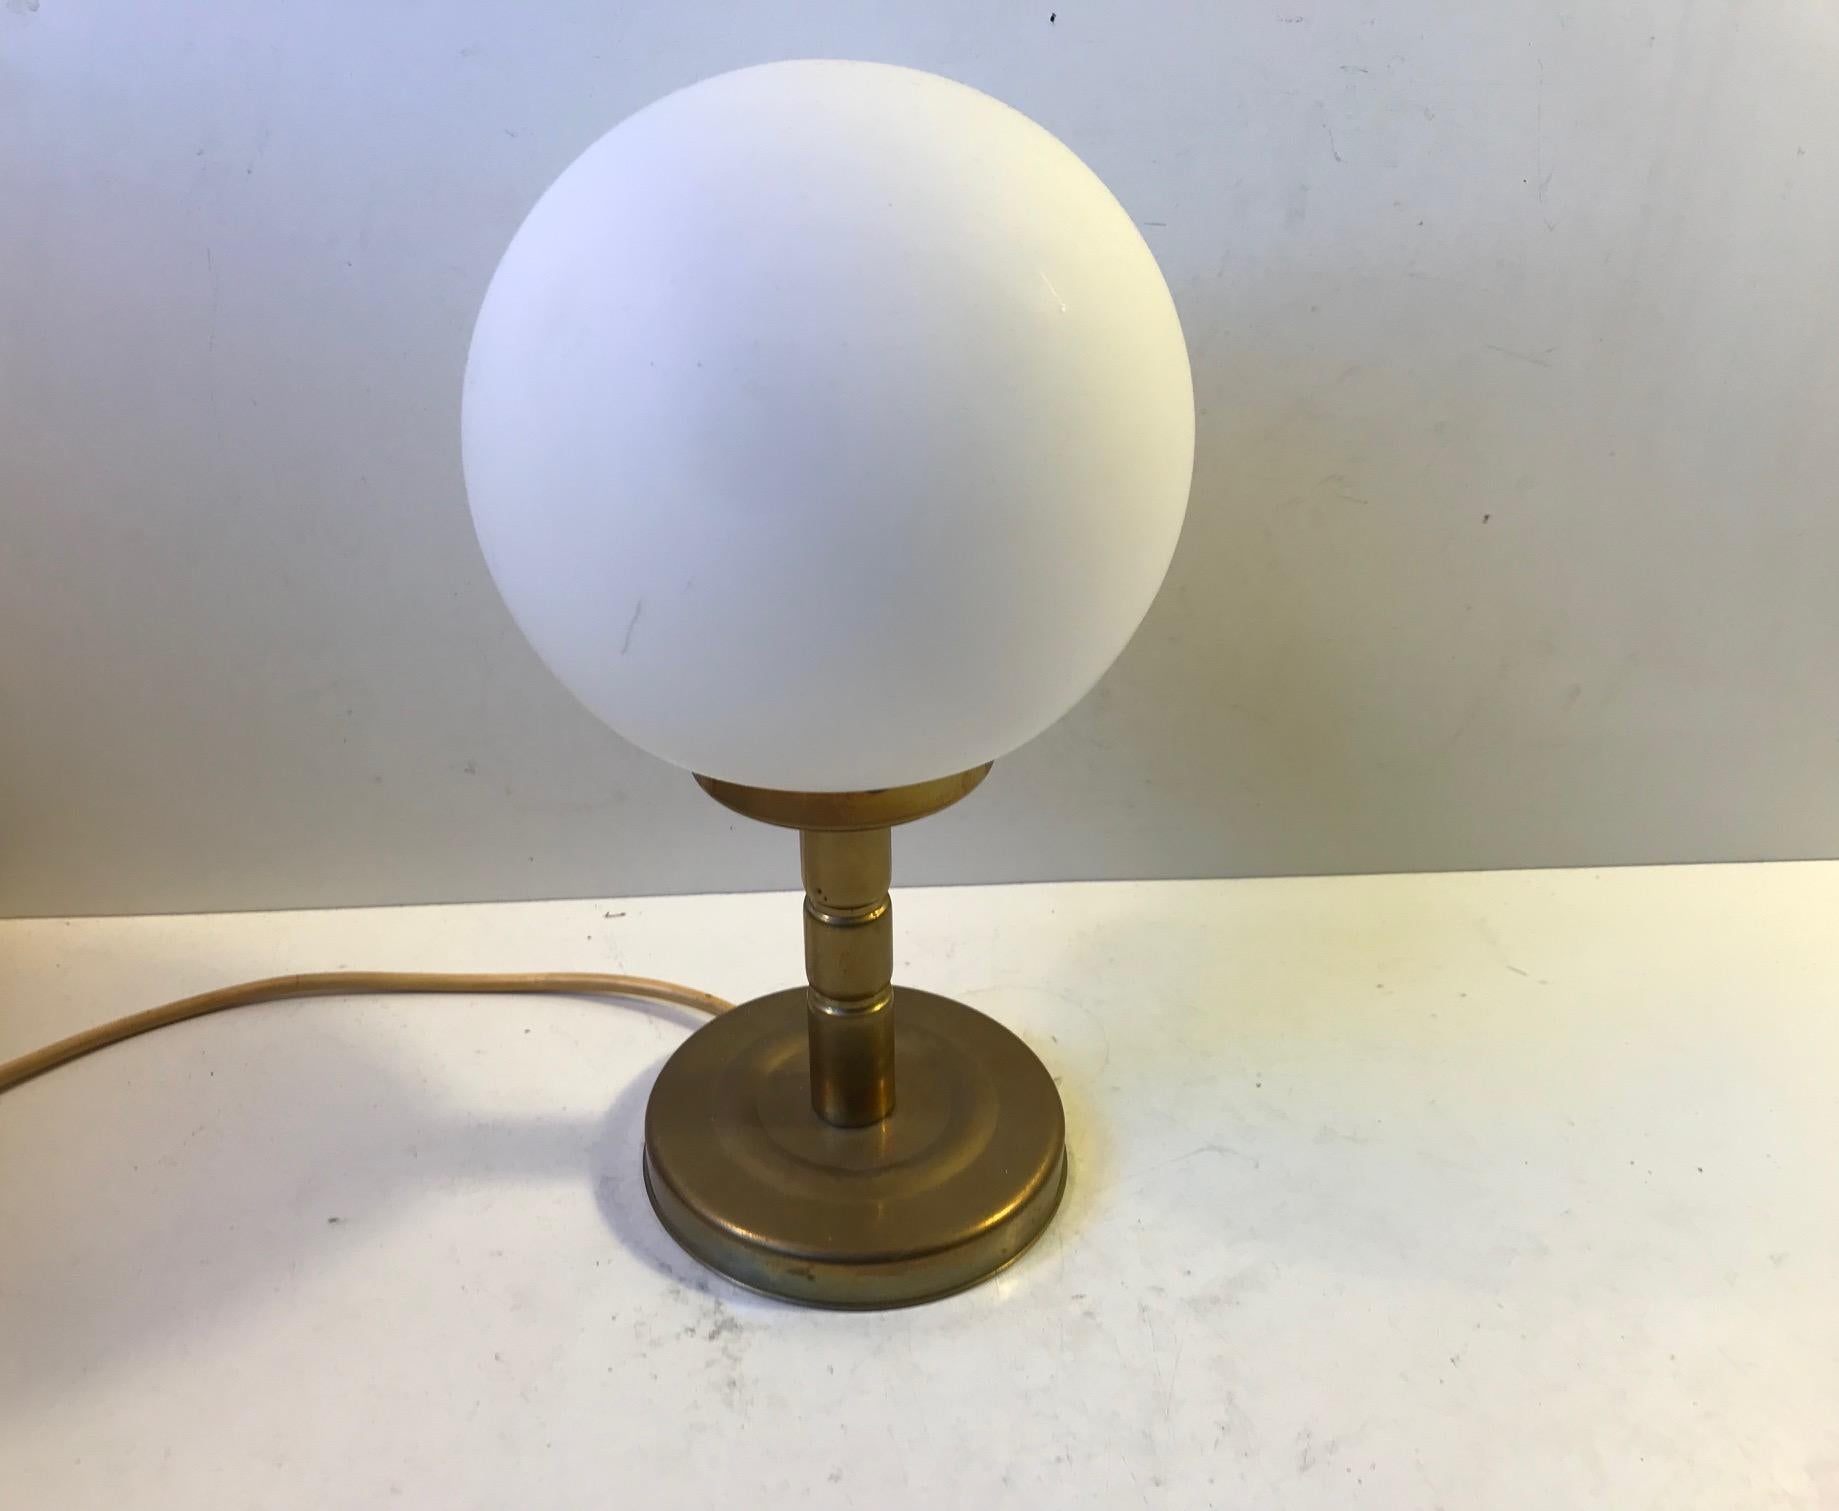 Small simplistically composed table lamp from Danish ABO - Metal Art Studio. Manufactured and designed during 1970s. The style of this light resembles Hans Agne Jakobsson and Michael Anastassiades.